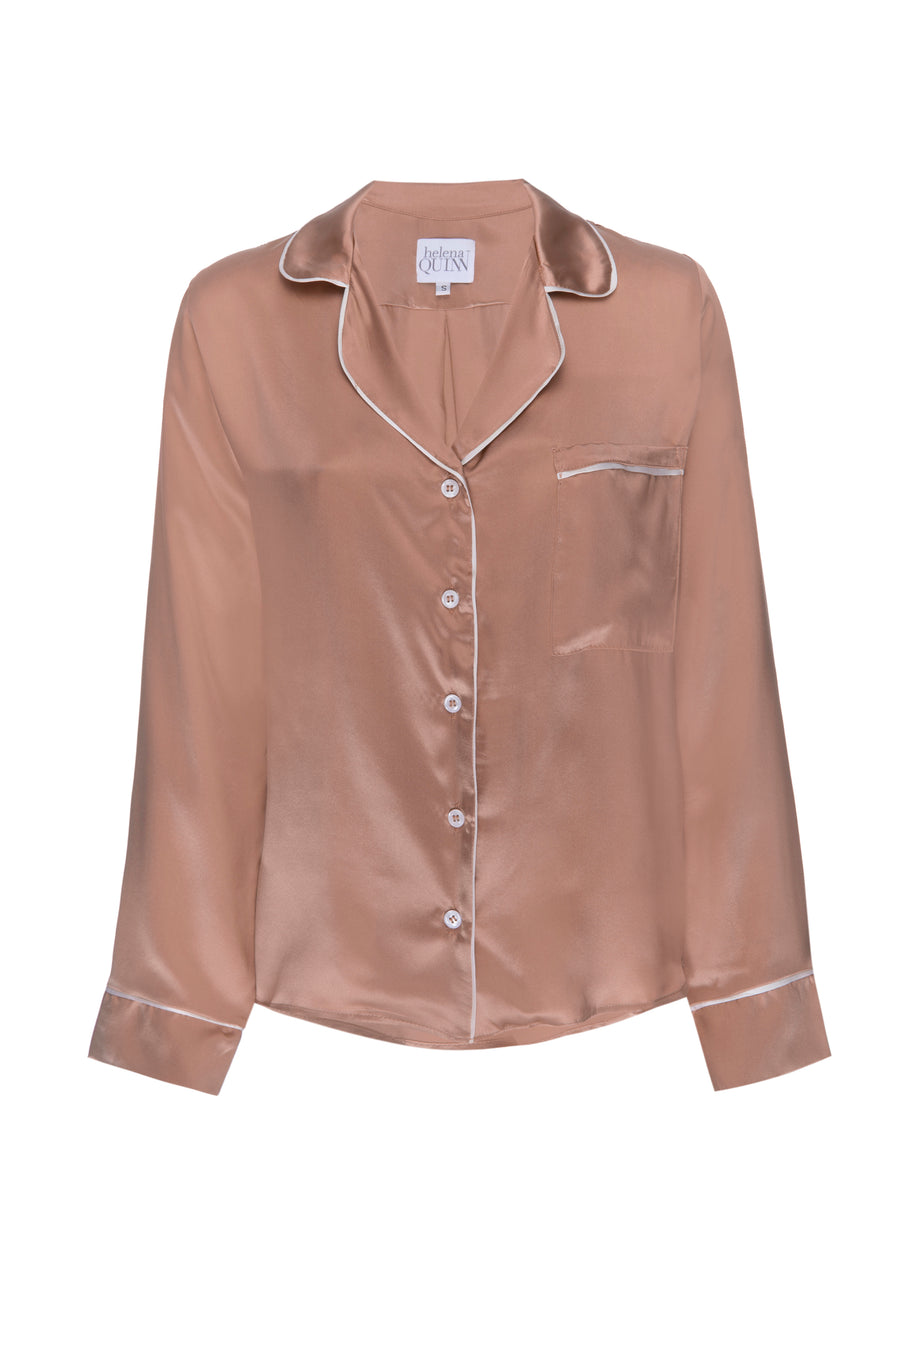 Silk Charmeuse Long Sleeved Top: Apricot